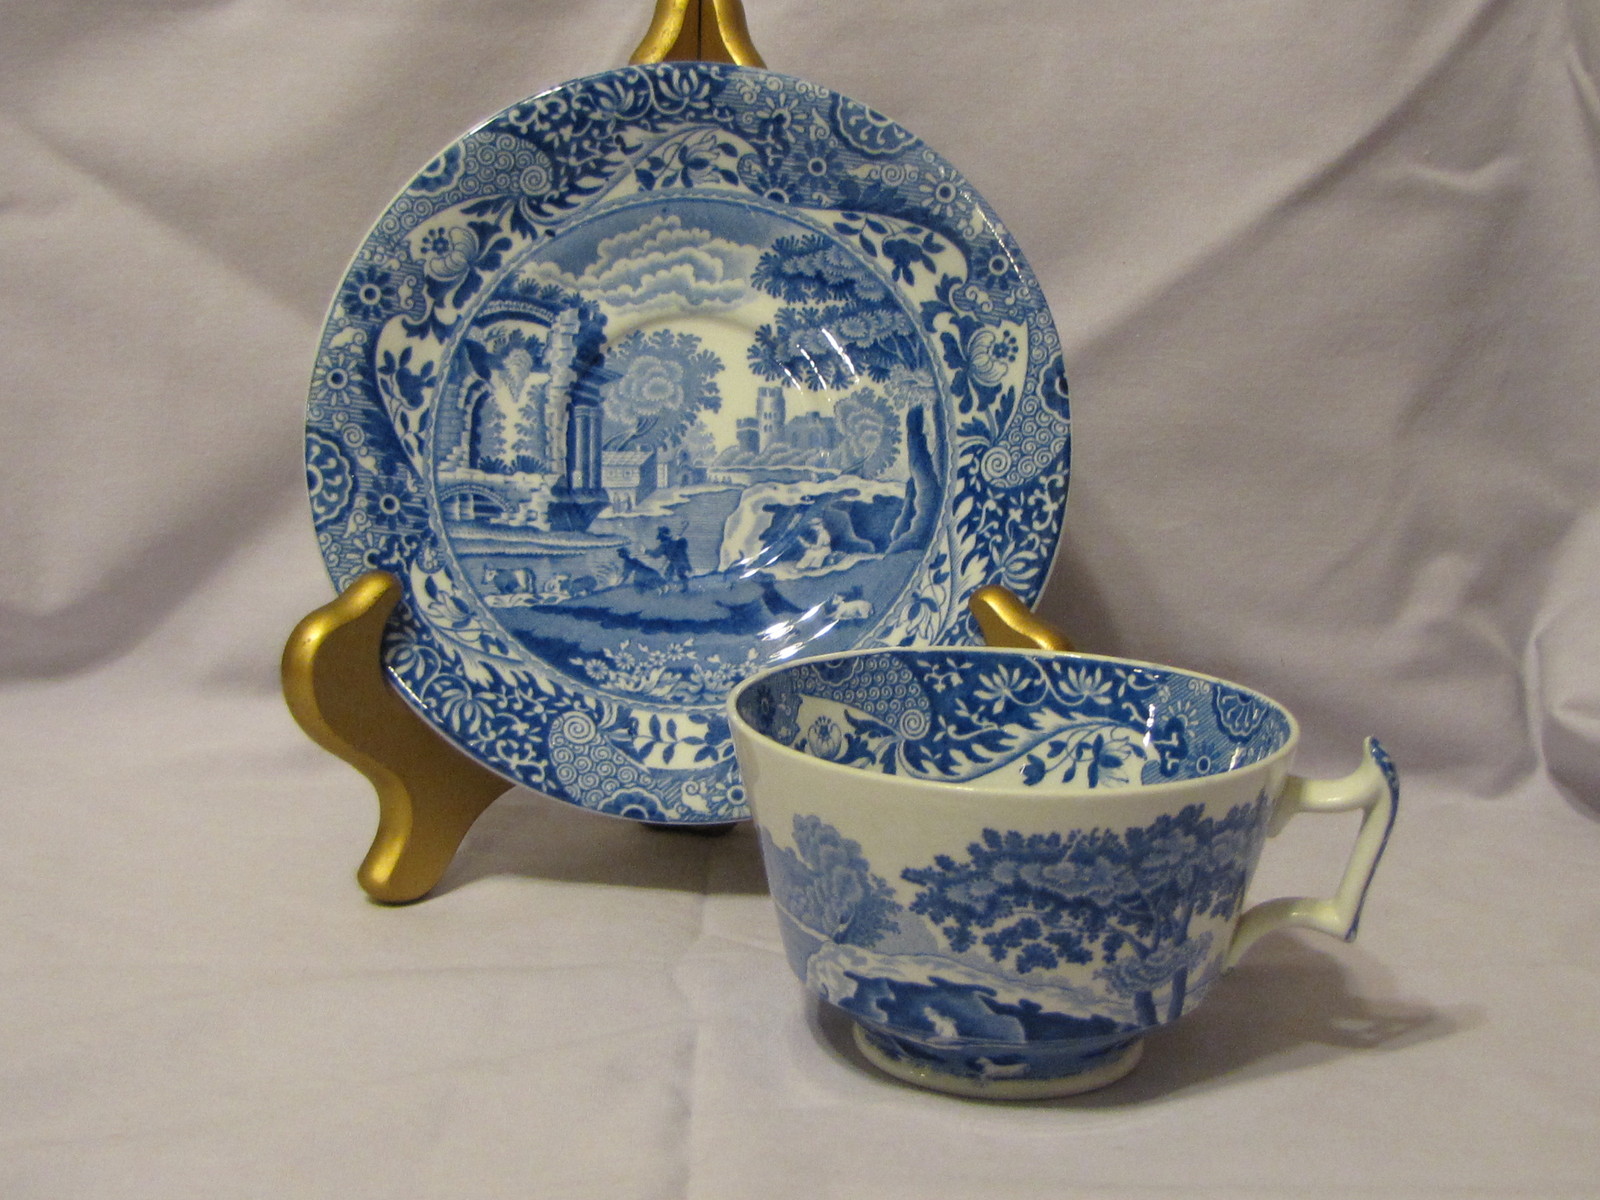 Copeland Spode's Blue Italian Footed Cup and Saucer England - $15.00